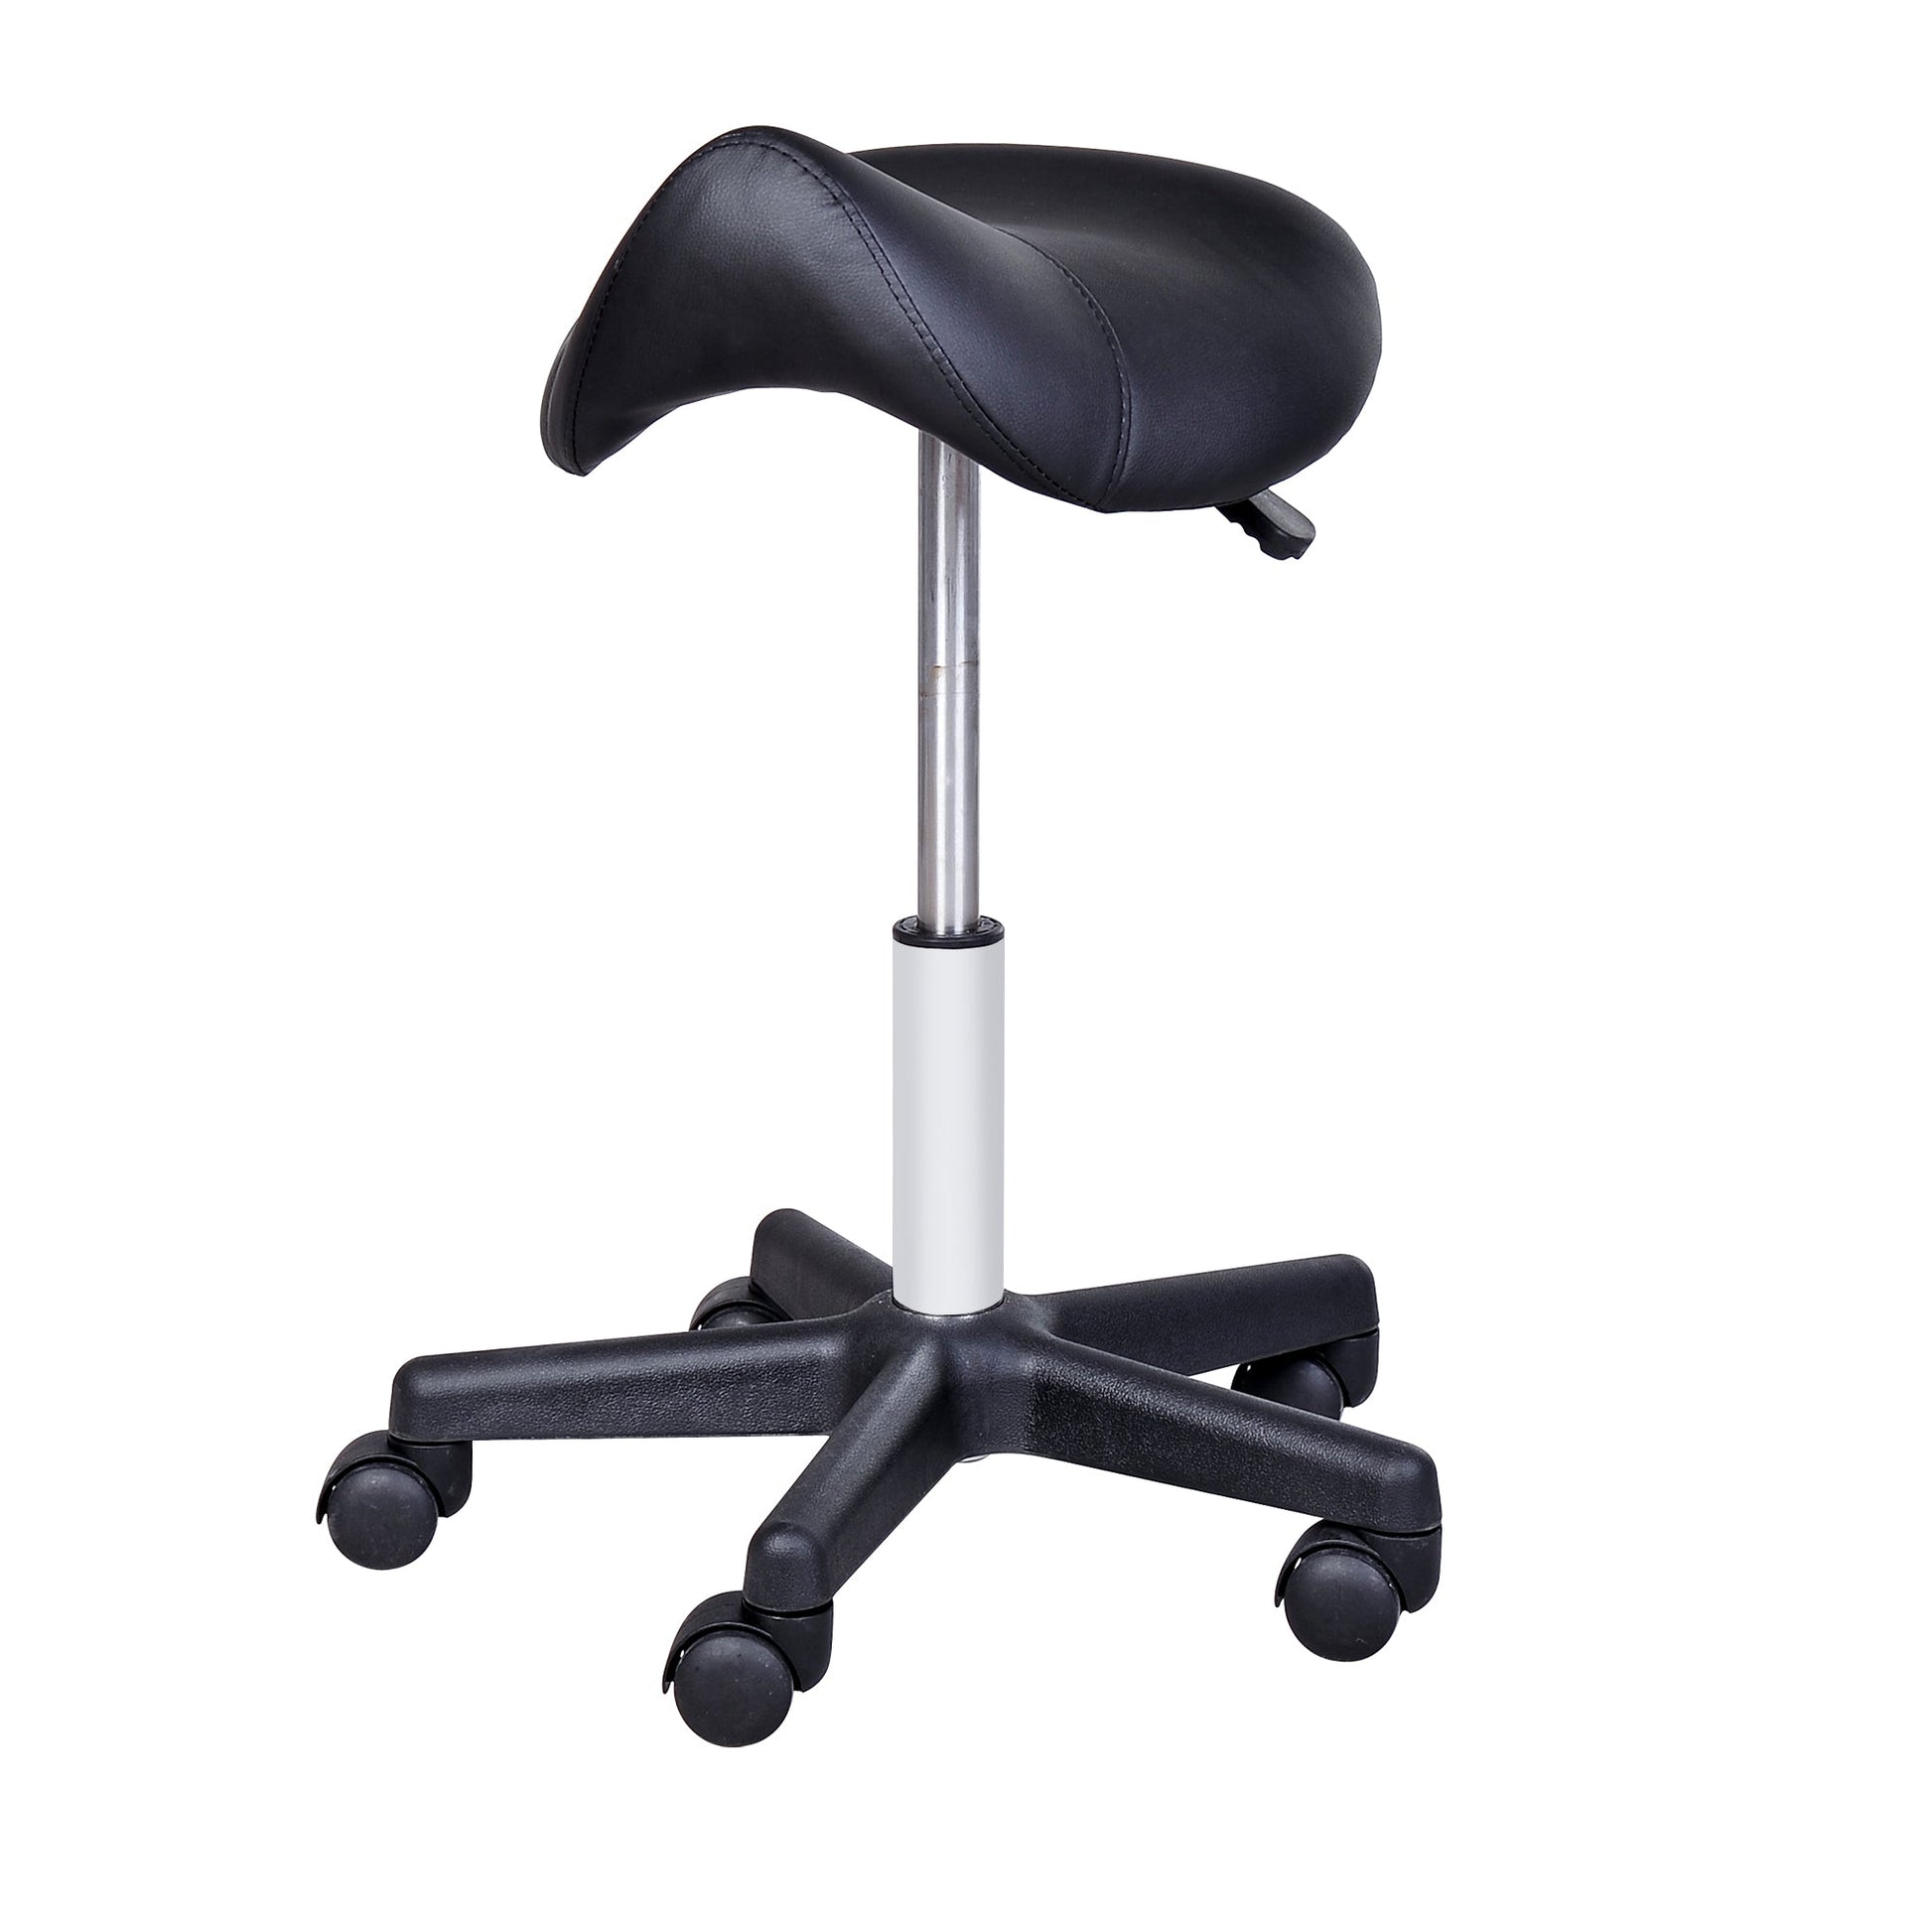 Saddle Stool, PU Leather Rolling Stool with Wheels, Adjustable Salon Chair for Kitchen, Salon Spa, Bar, Home Office, Massage, Black at Gallery Canada